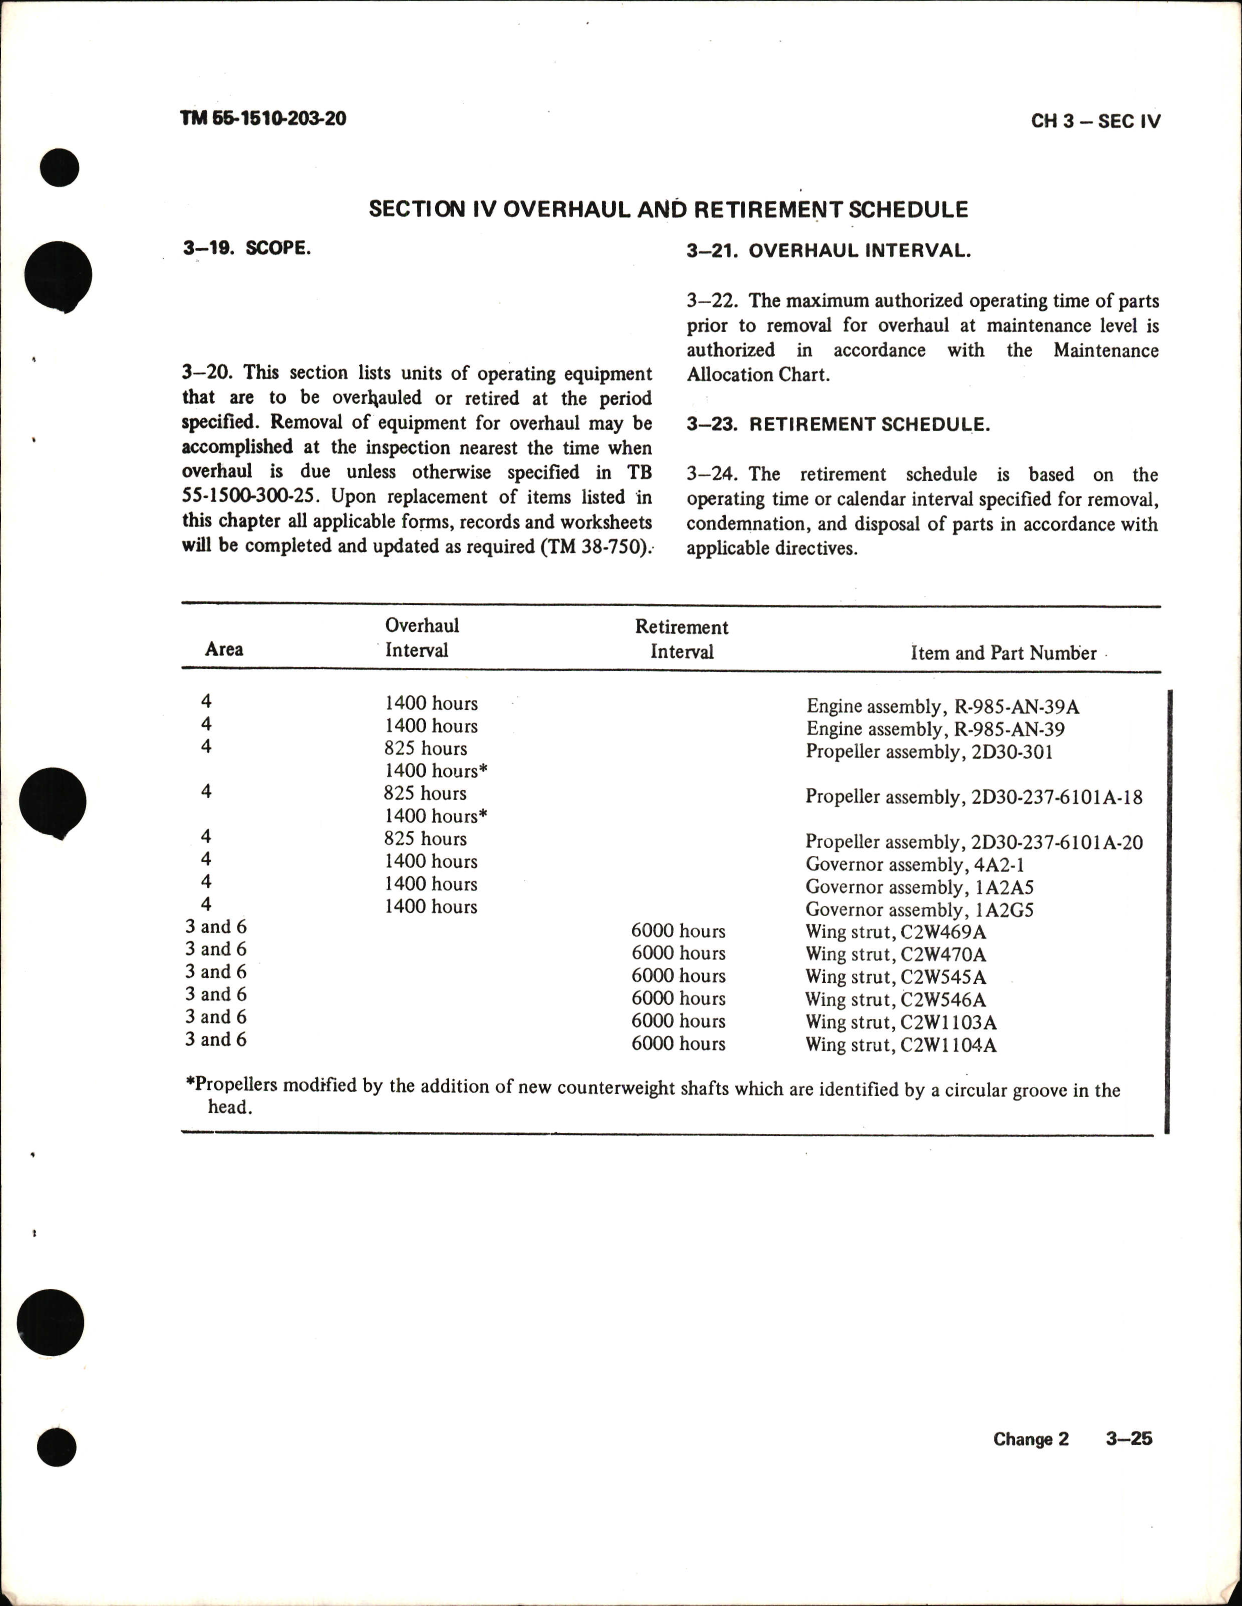 Sample page 5 from AirCorps Library document: Organizational Maintenance Manual for U-6A Aircraft